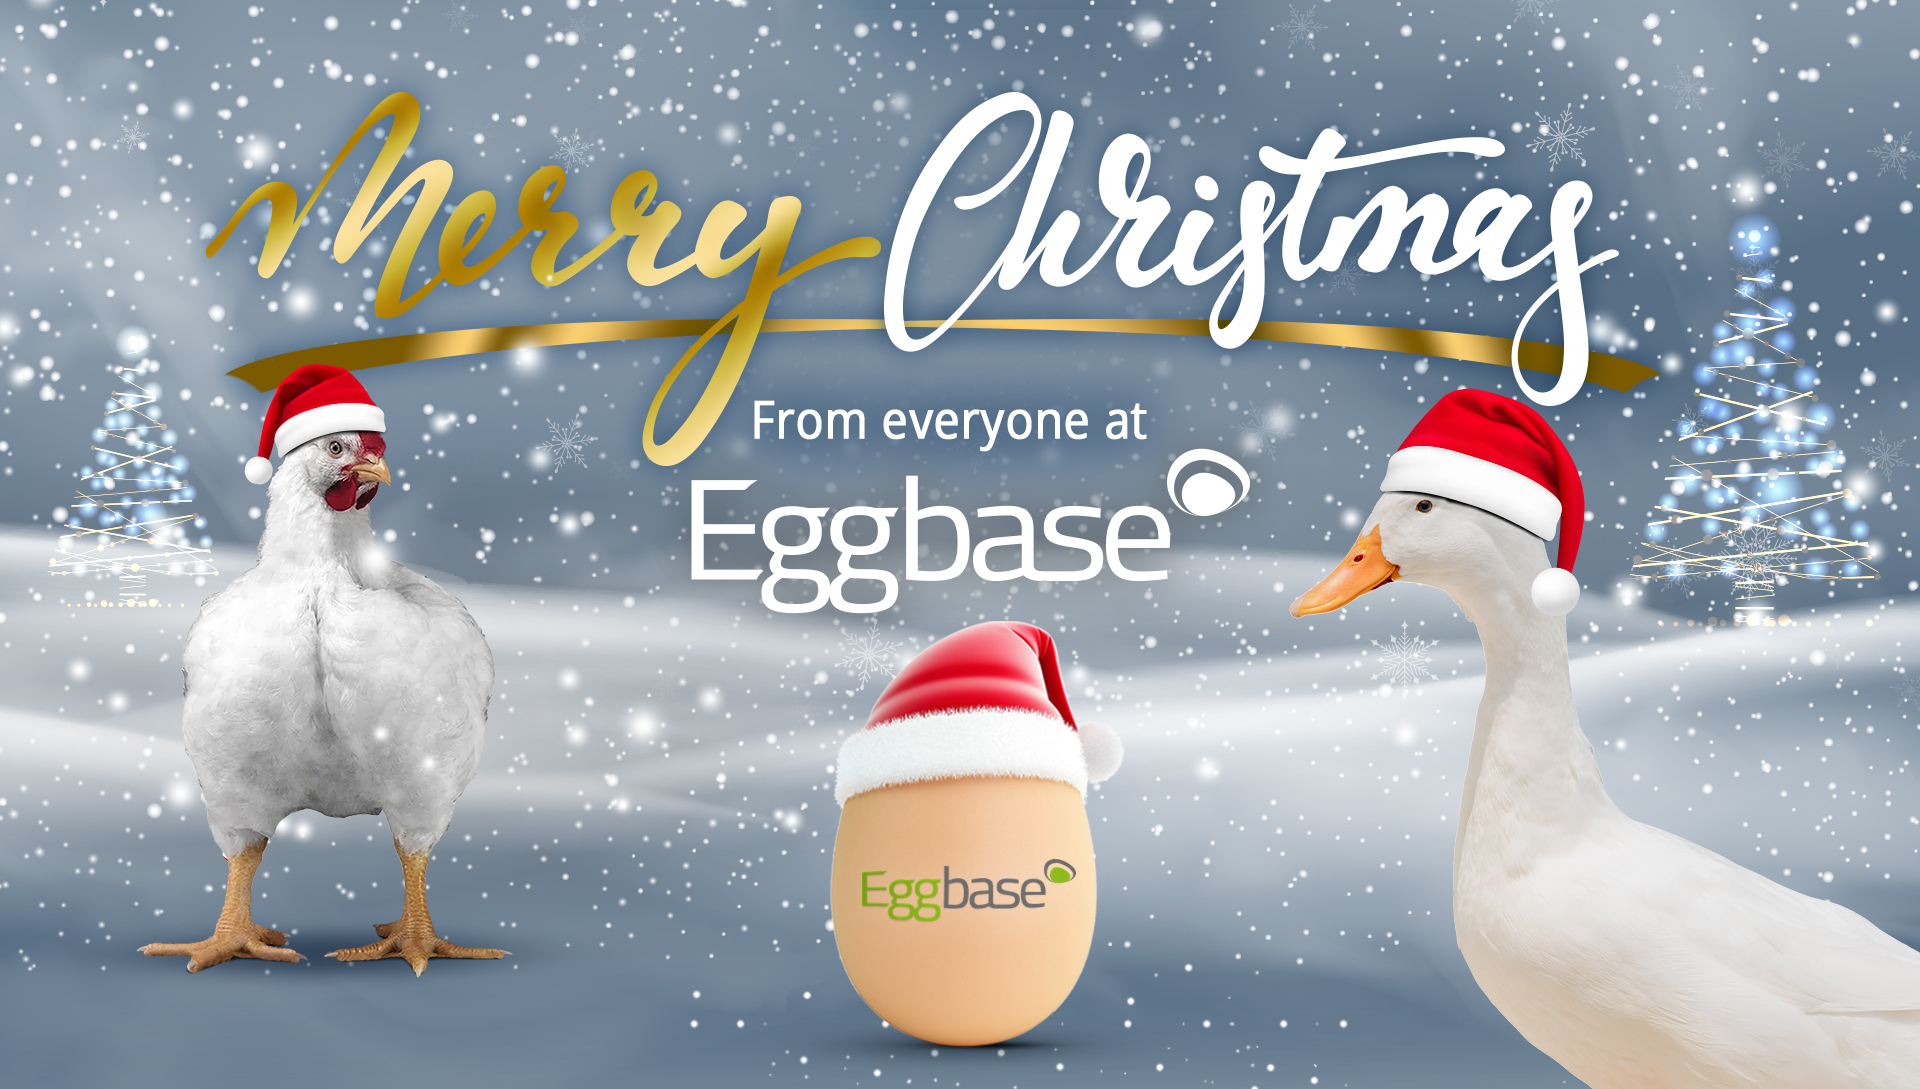 Merry Christmas and Happy New Year from Eggbase